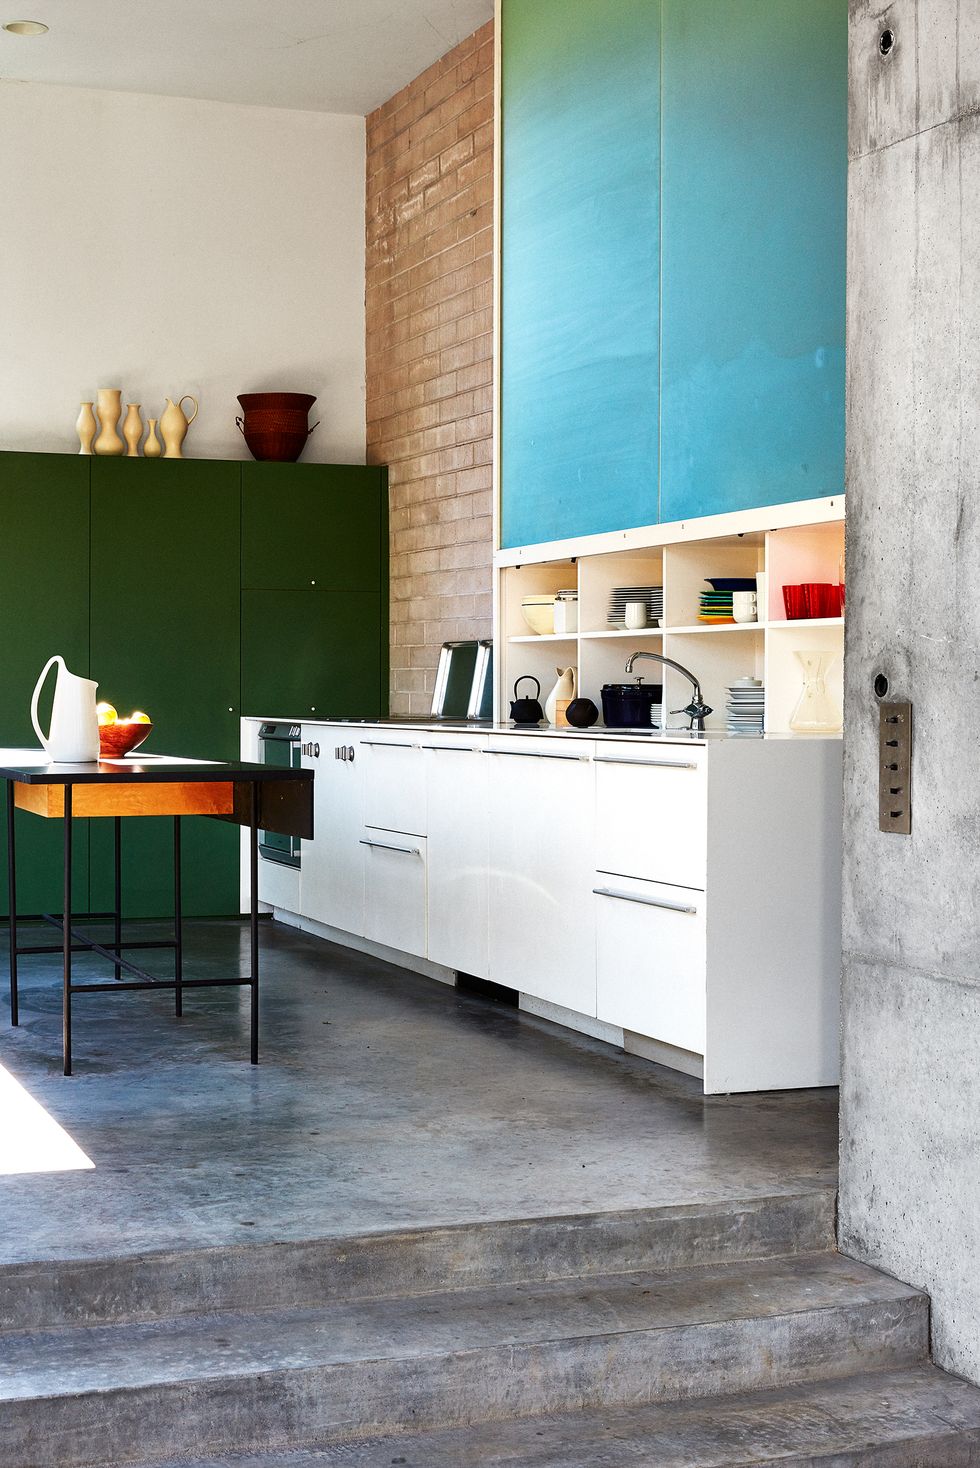 14 of the Best Kitchen Paint Colors to Rev Up Your Walls